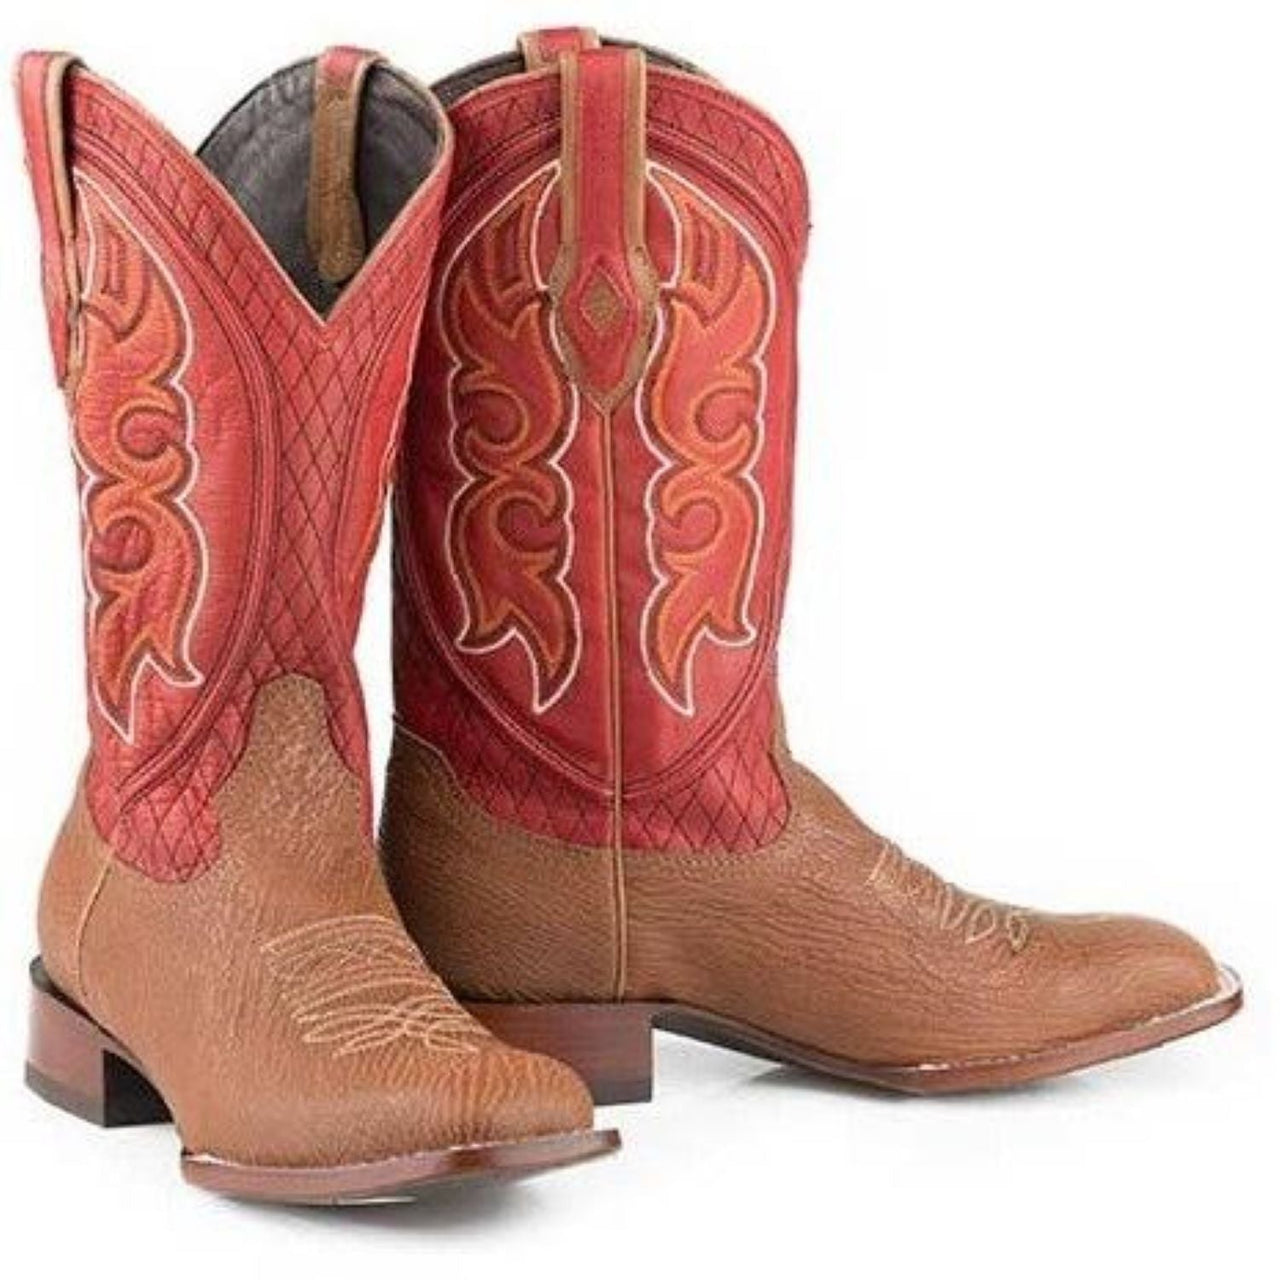 Men's Stetson Glendive Sharkskin Boots Square Toe Handcrafted JBS Collection Tan - yeehawcowboy